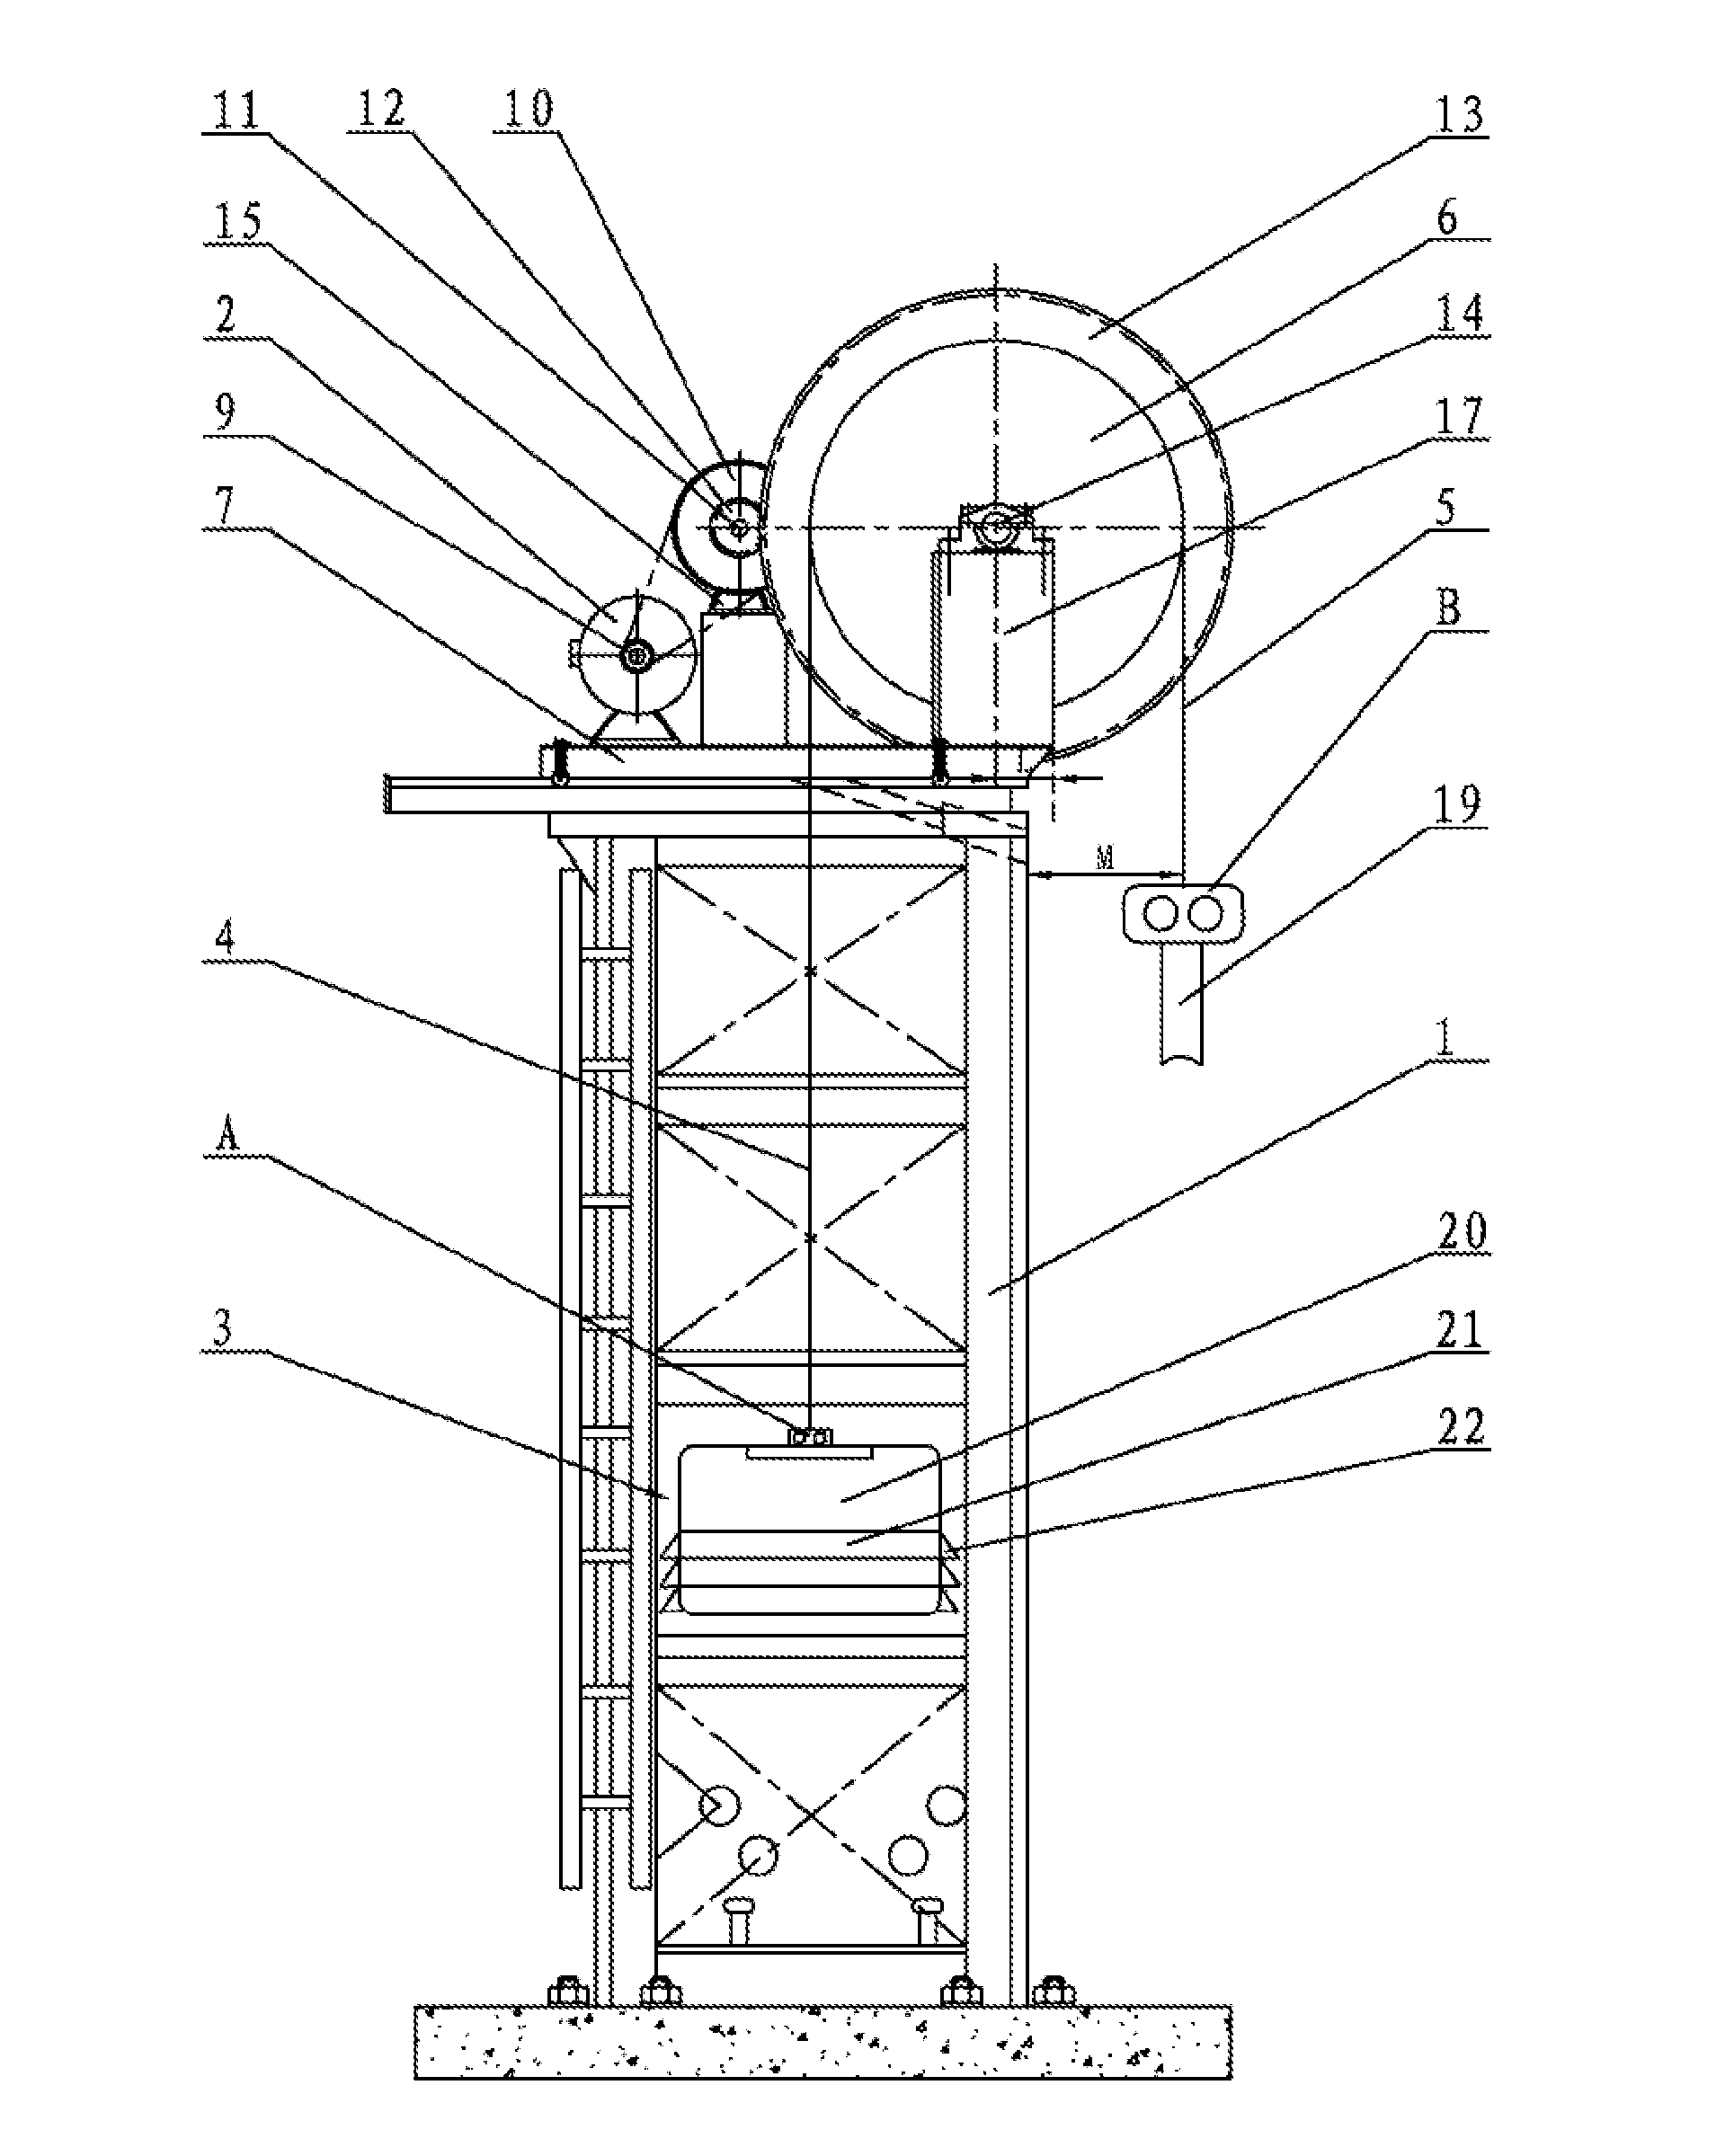 Tower frame combined transmitting pumping unit without guiding wheels